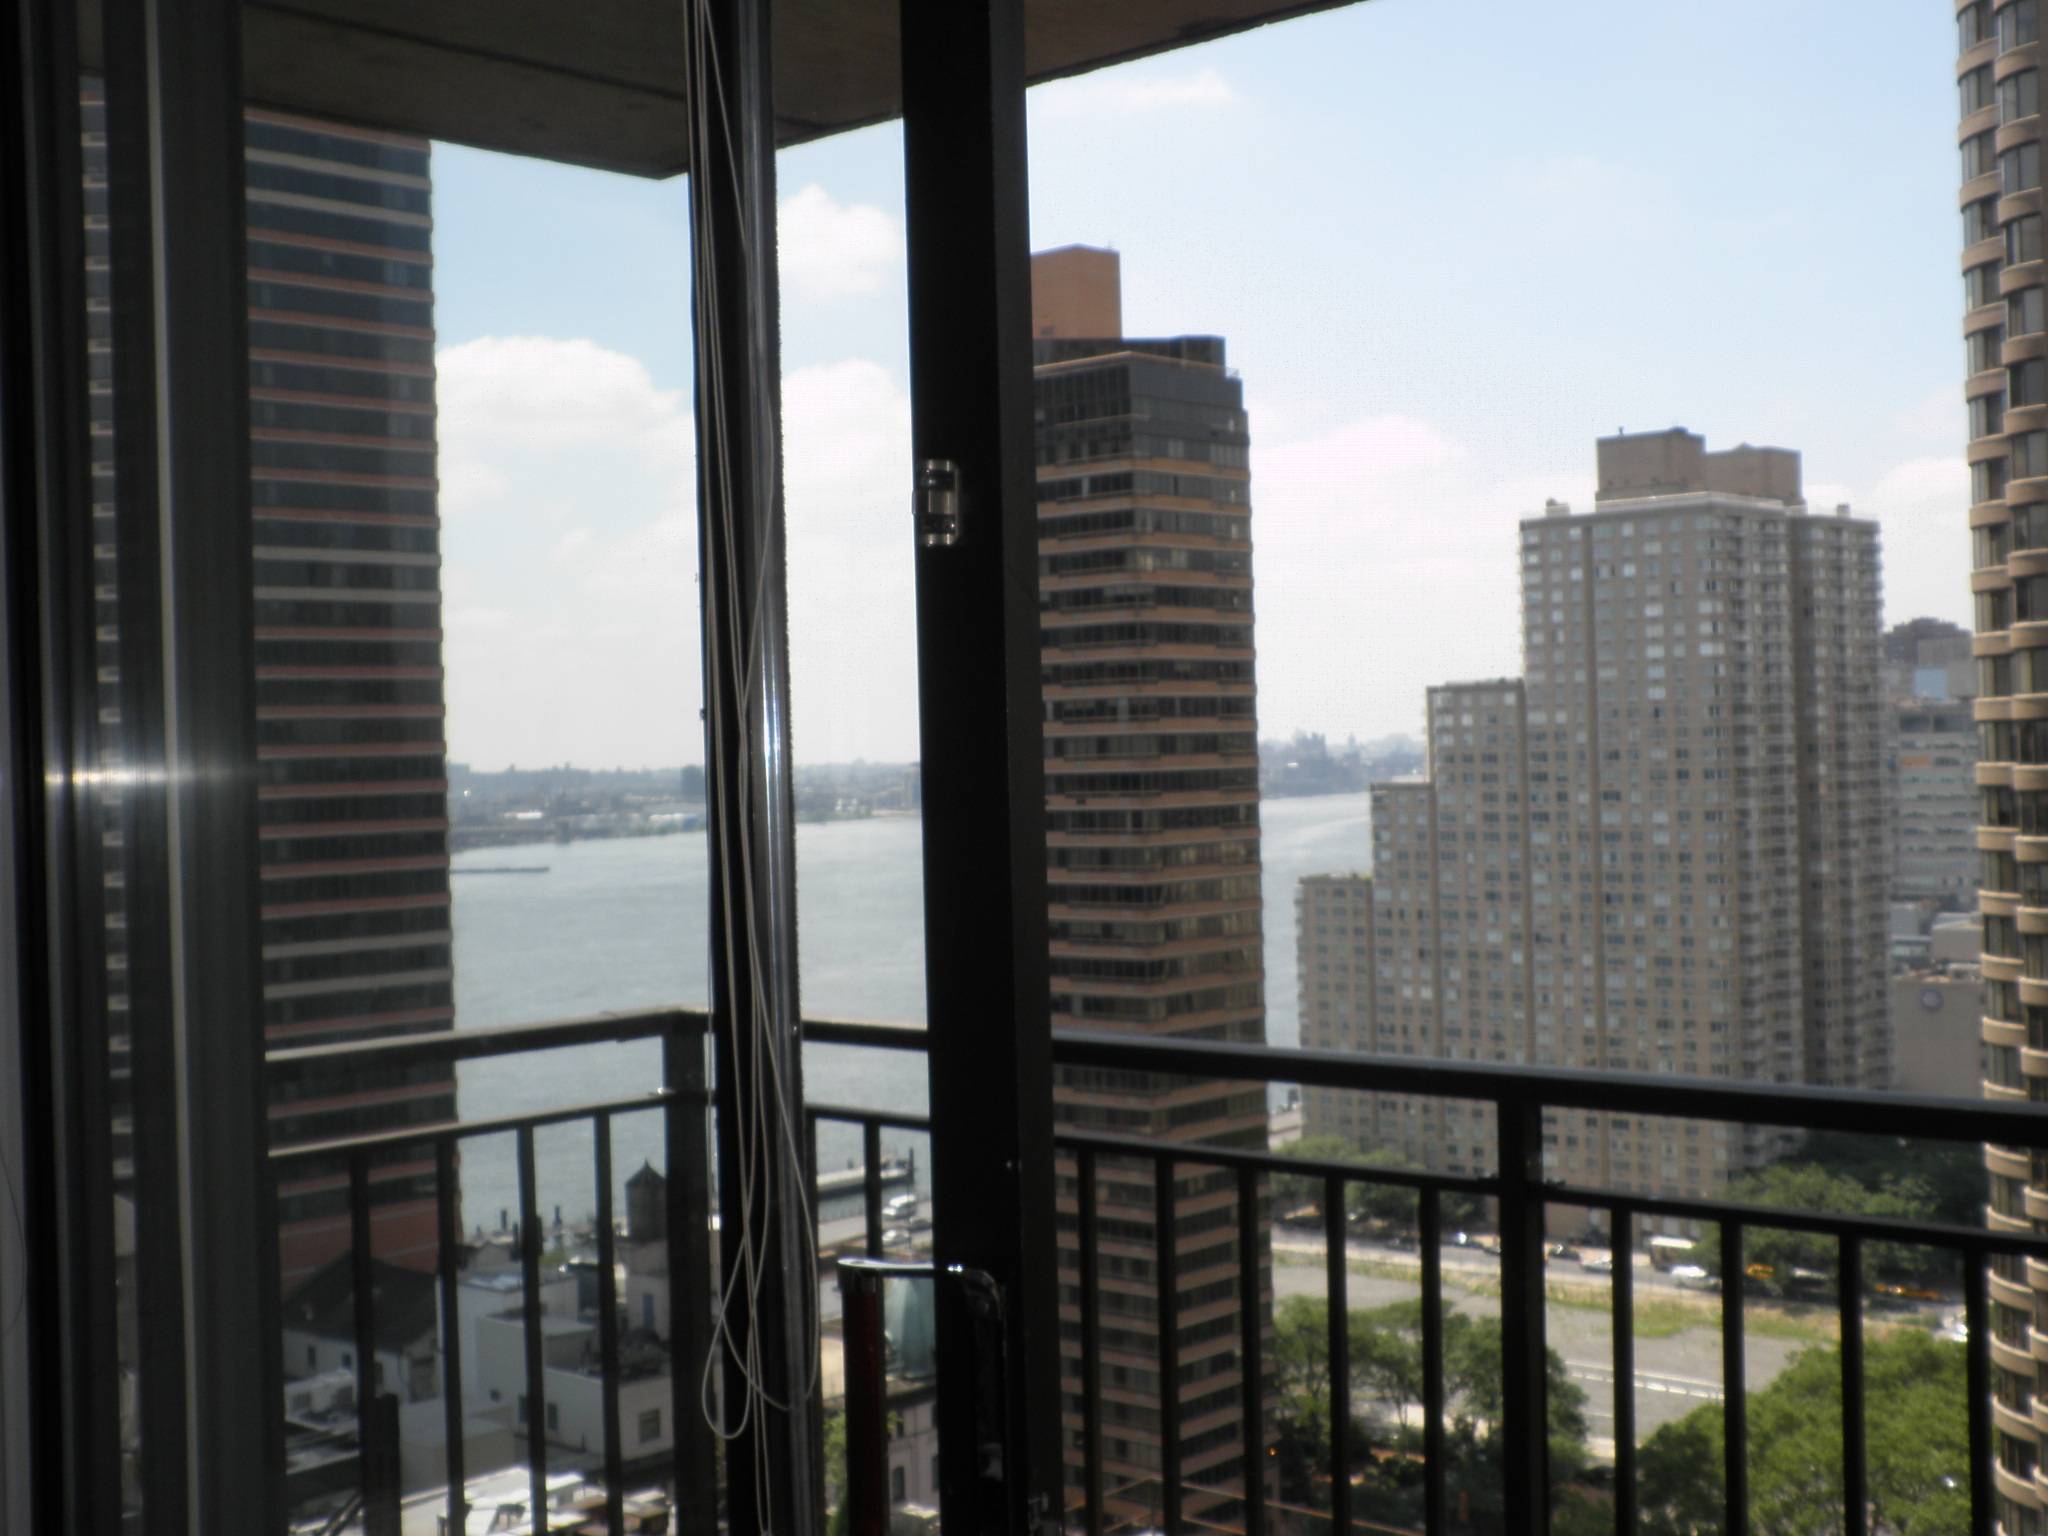 NO FEE!! Real 2BR- GRAND CENTRAL! 24 HOURS DOORMAN, GYM, BALCONY, RENOVATED...